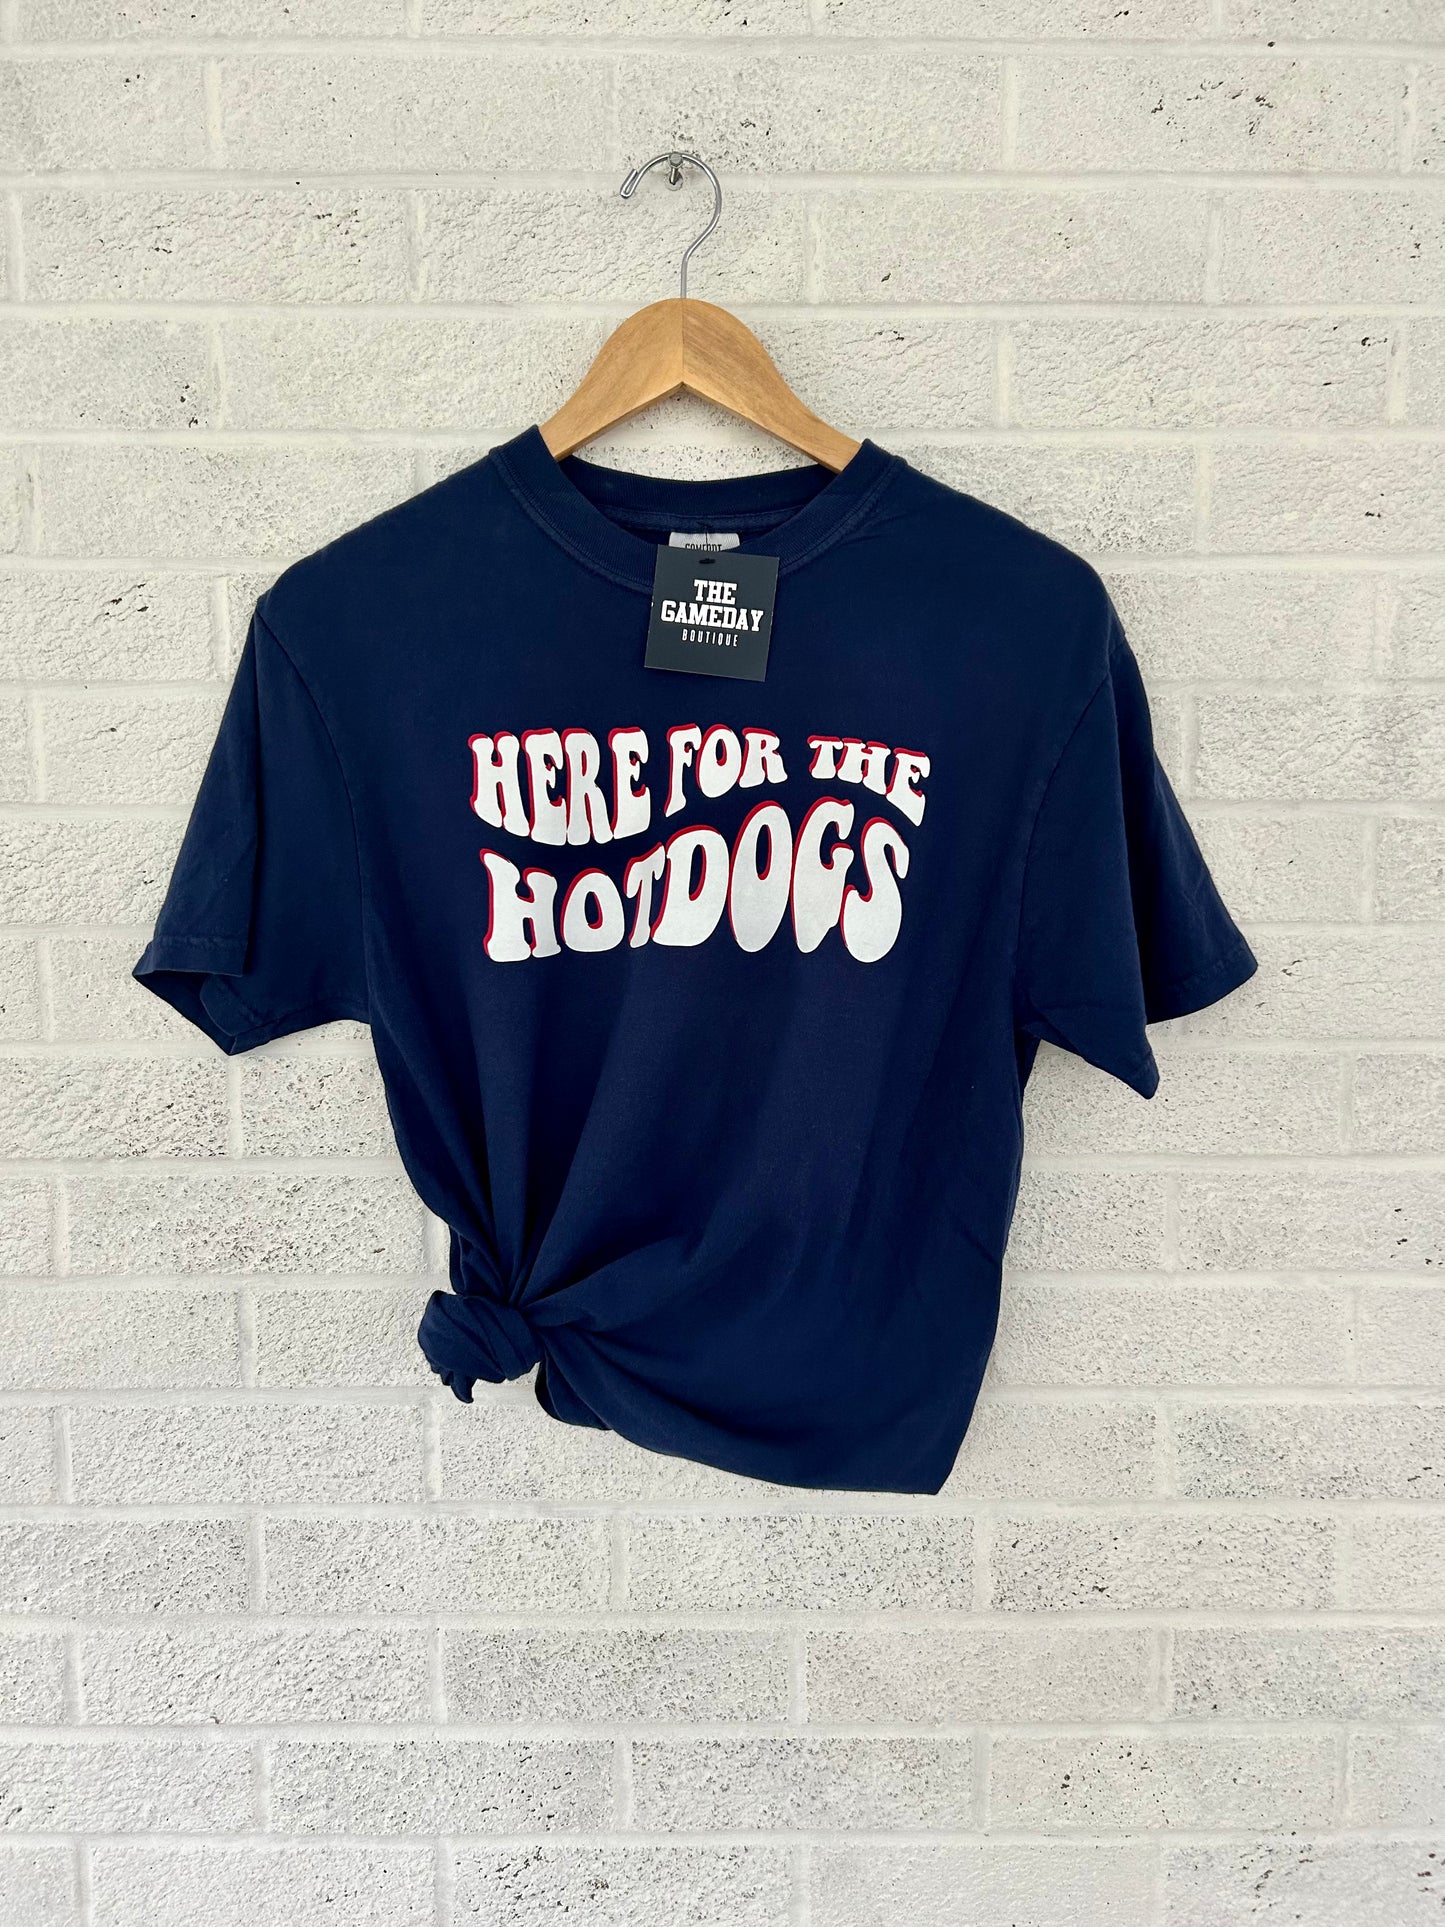 Here for the Hotdogs Short-Sleeve T-shirt